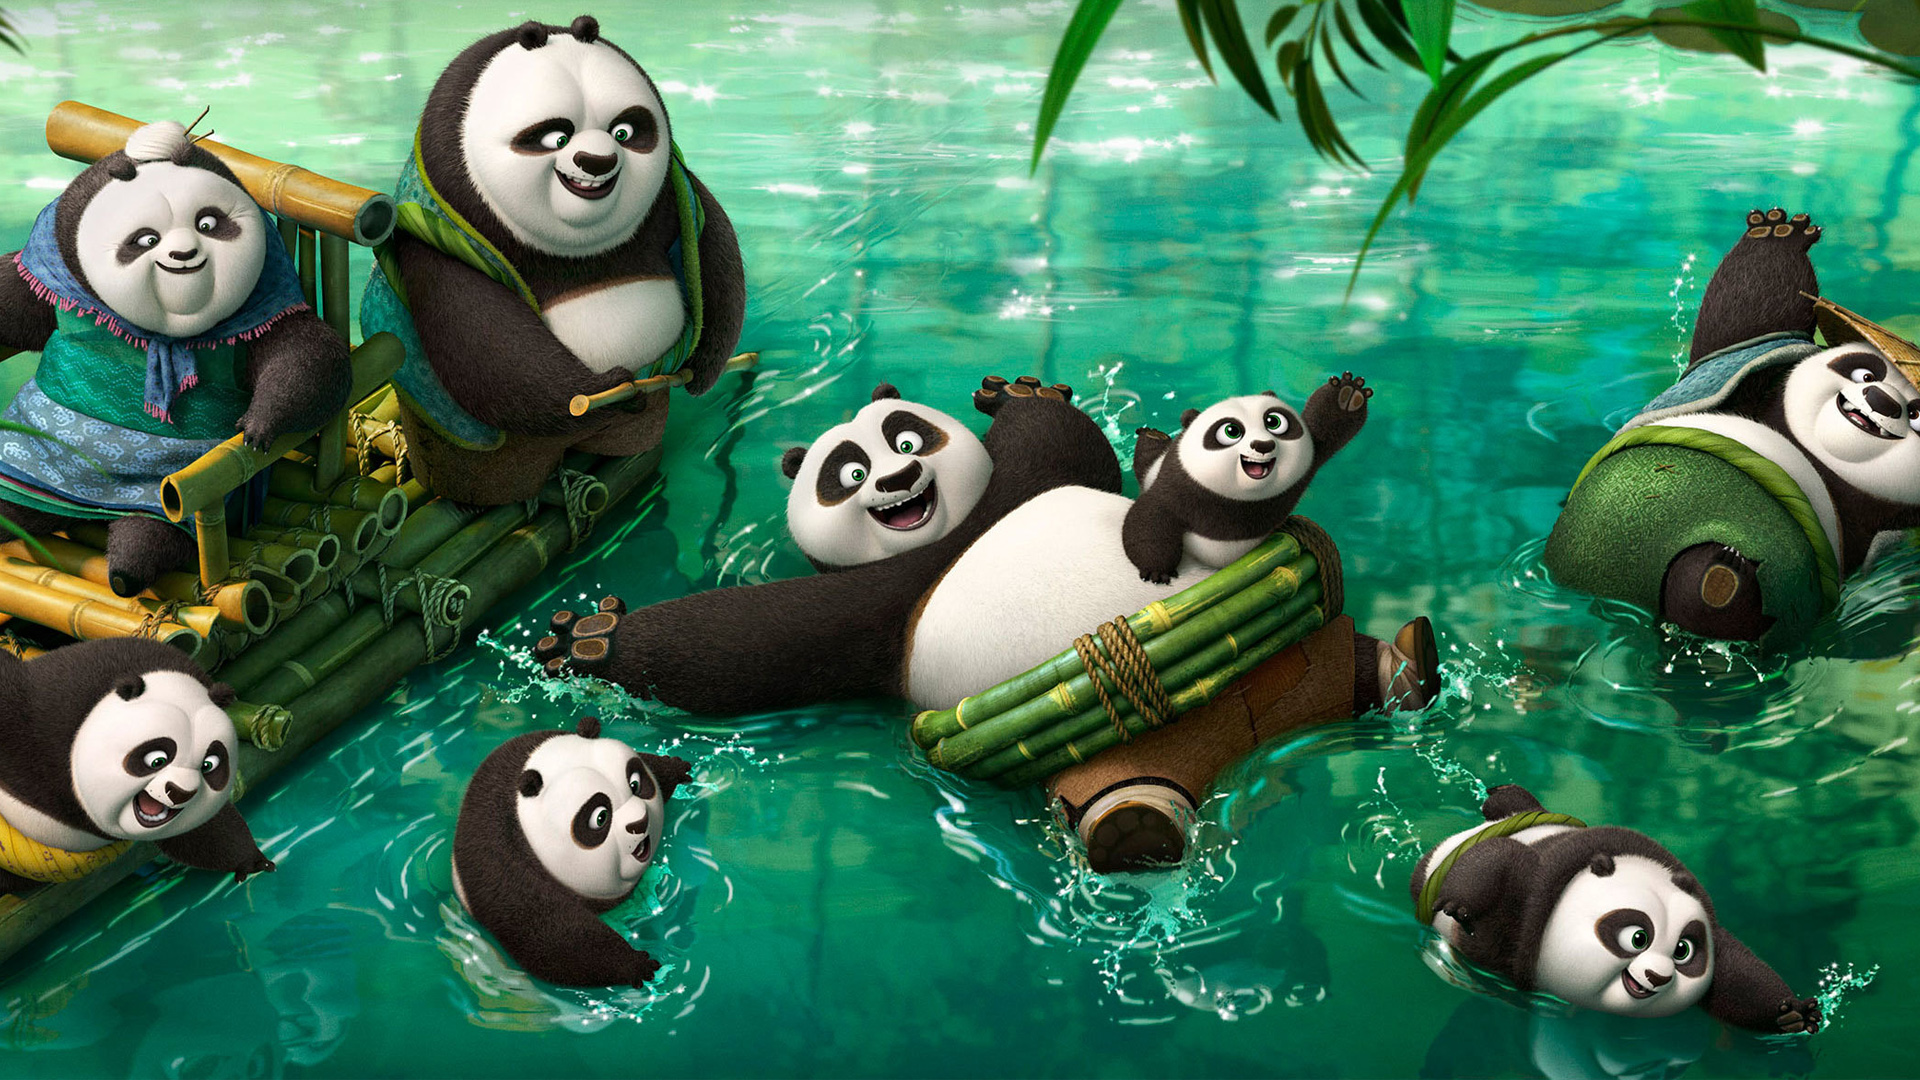 Pandas 4K wallpapers for your desktop or mobile screen free and easy to  download